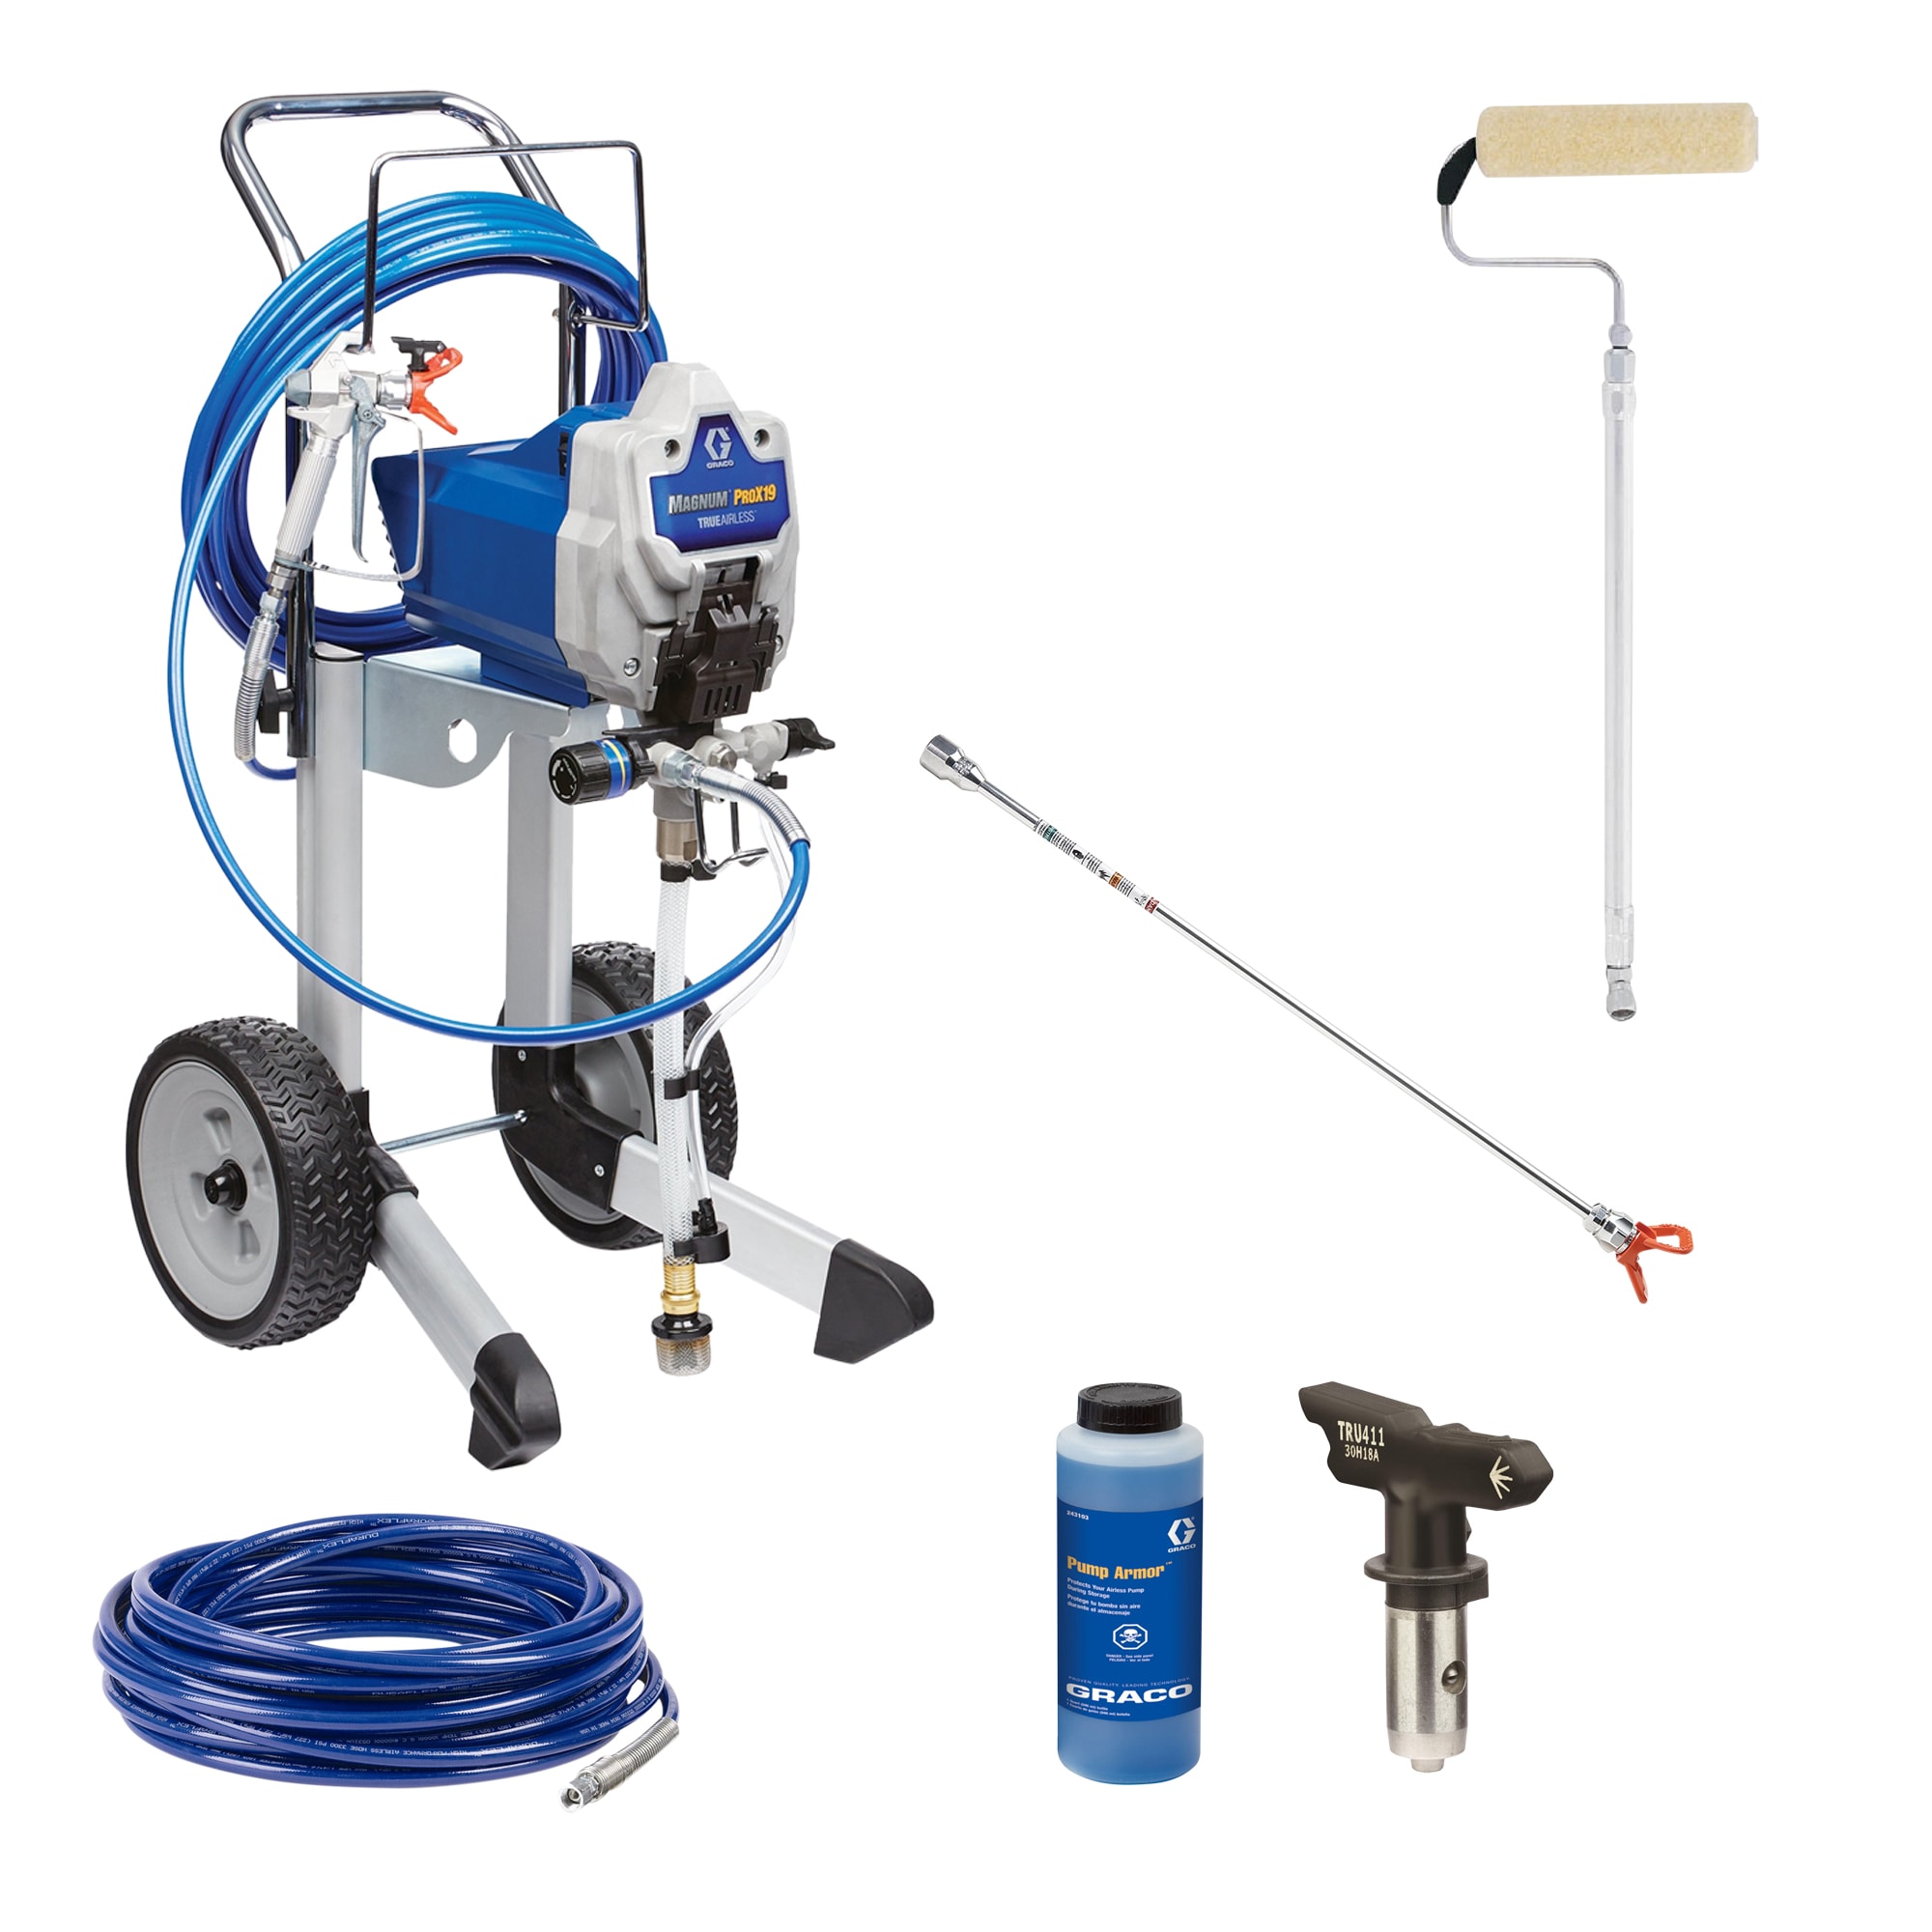 Tips for Painting With an Airless Sprayer - Lawrence Tool Rental Inc